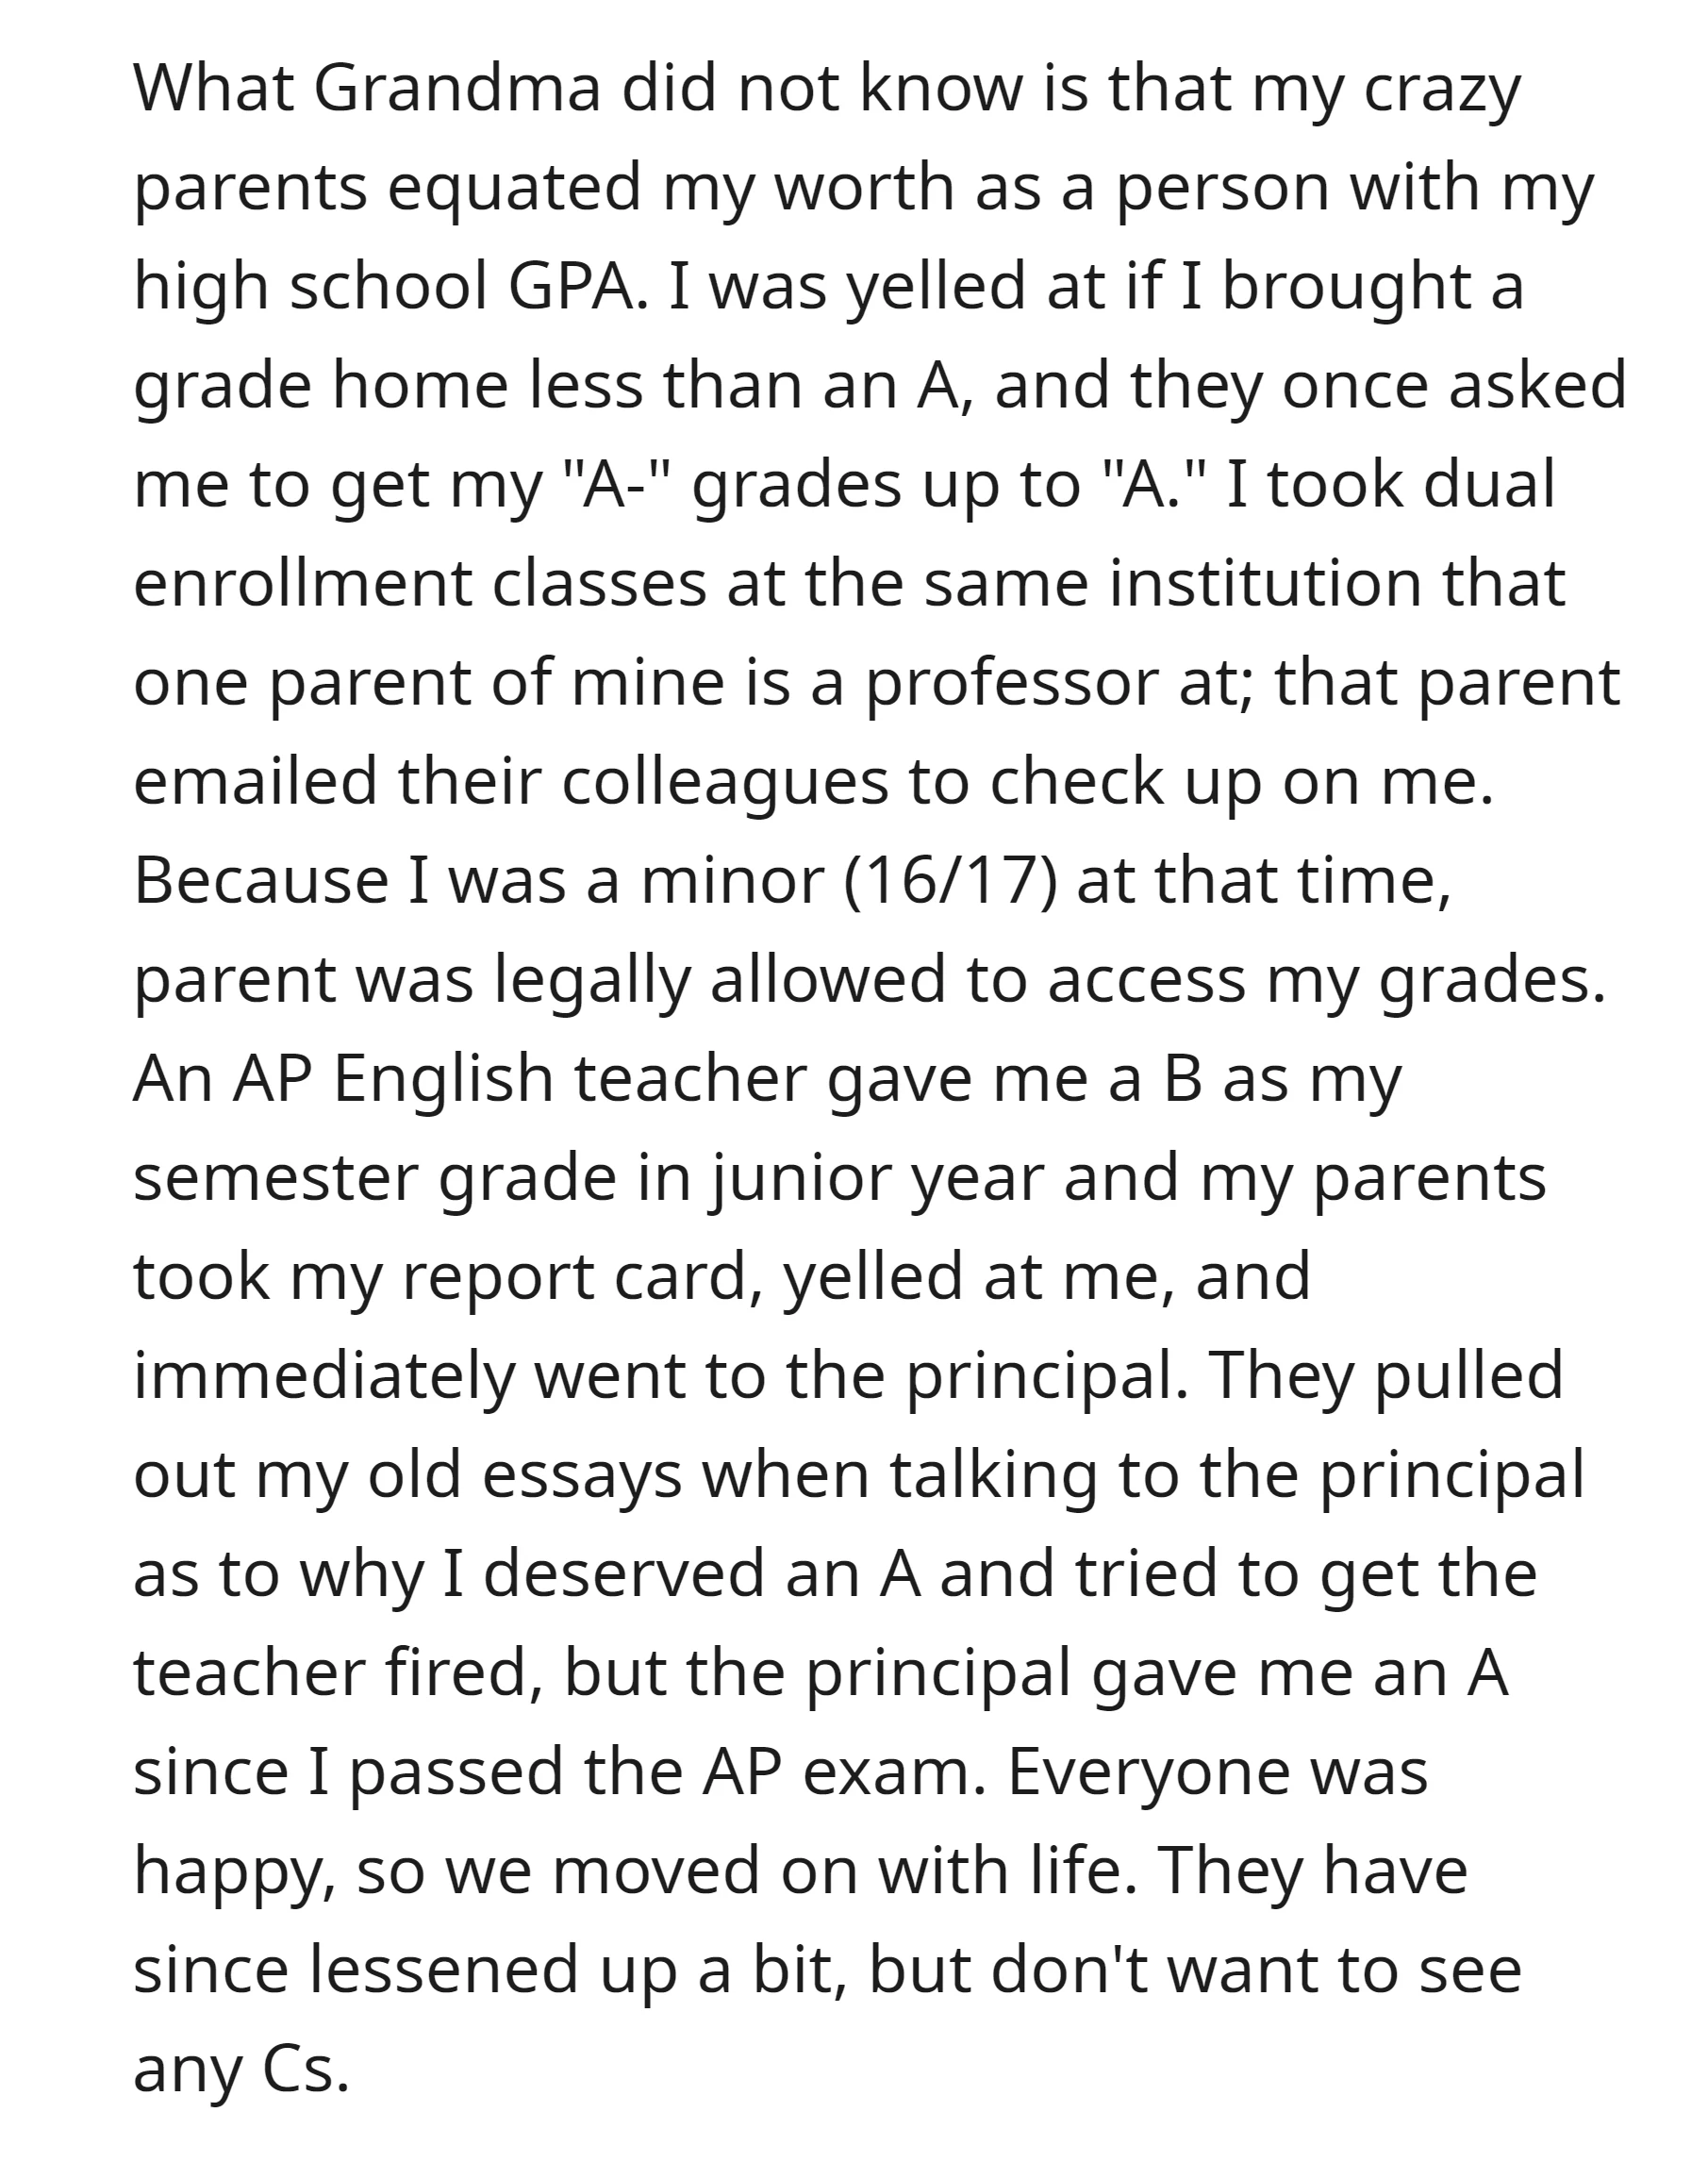 OP's parents were highly demanding, and they once equated her worth with high school GPA